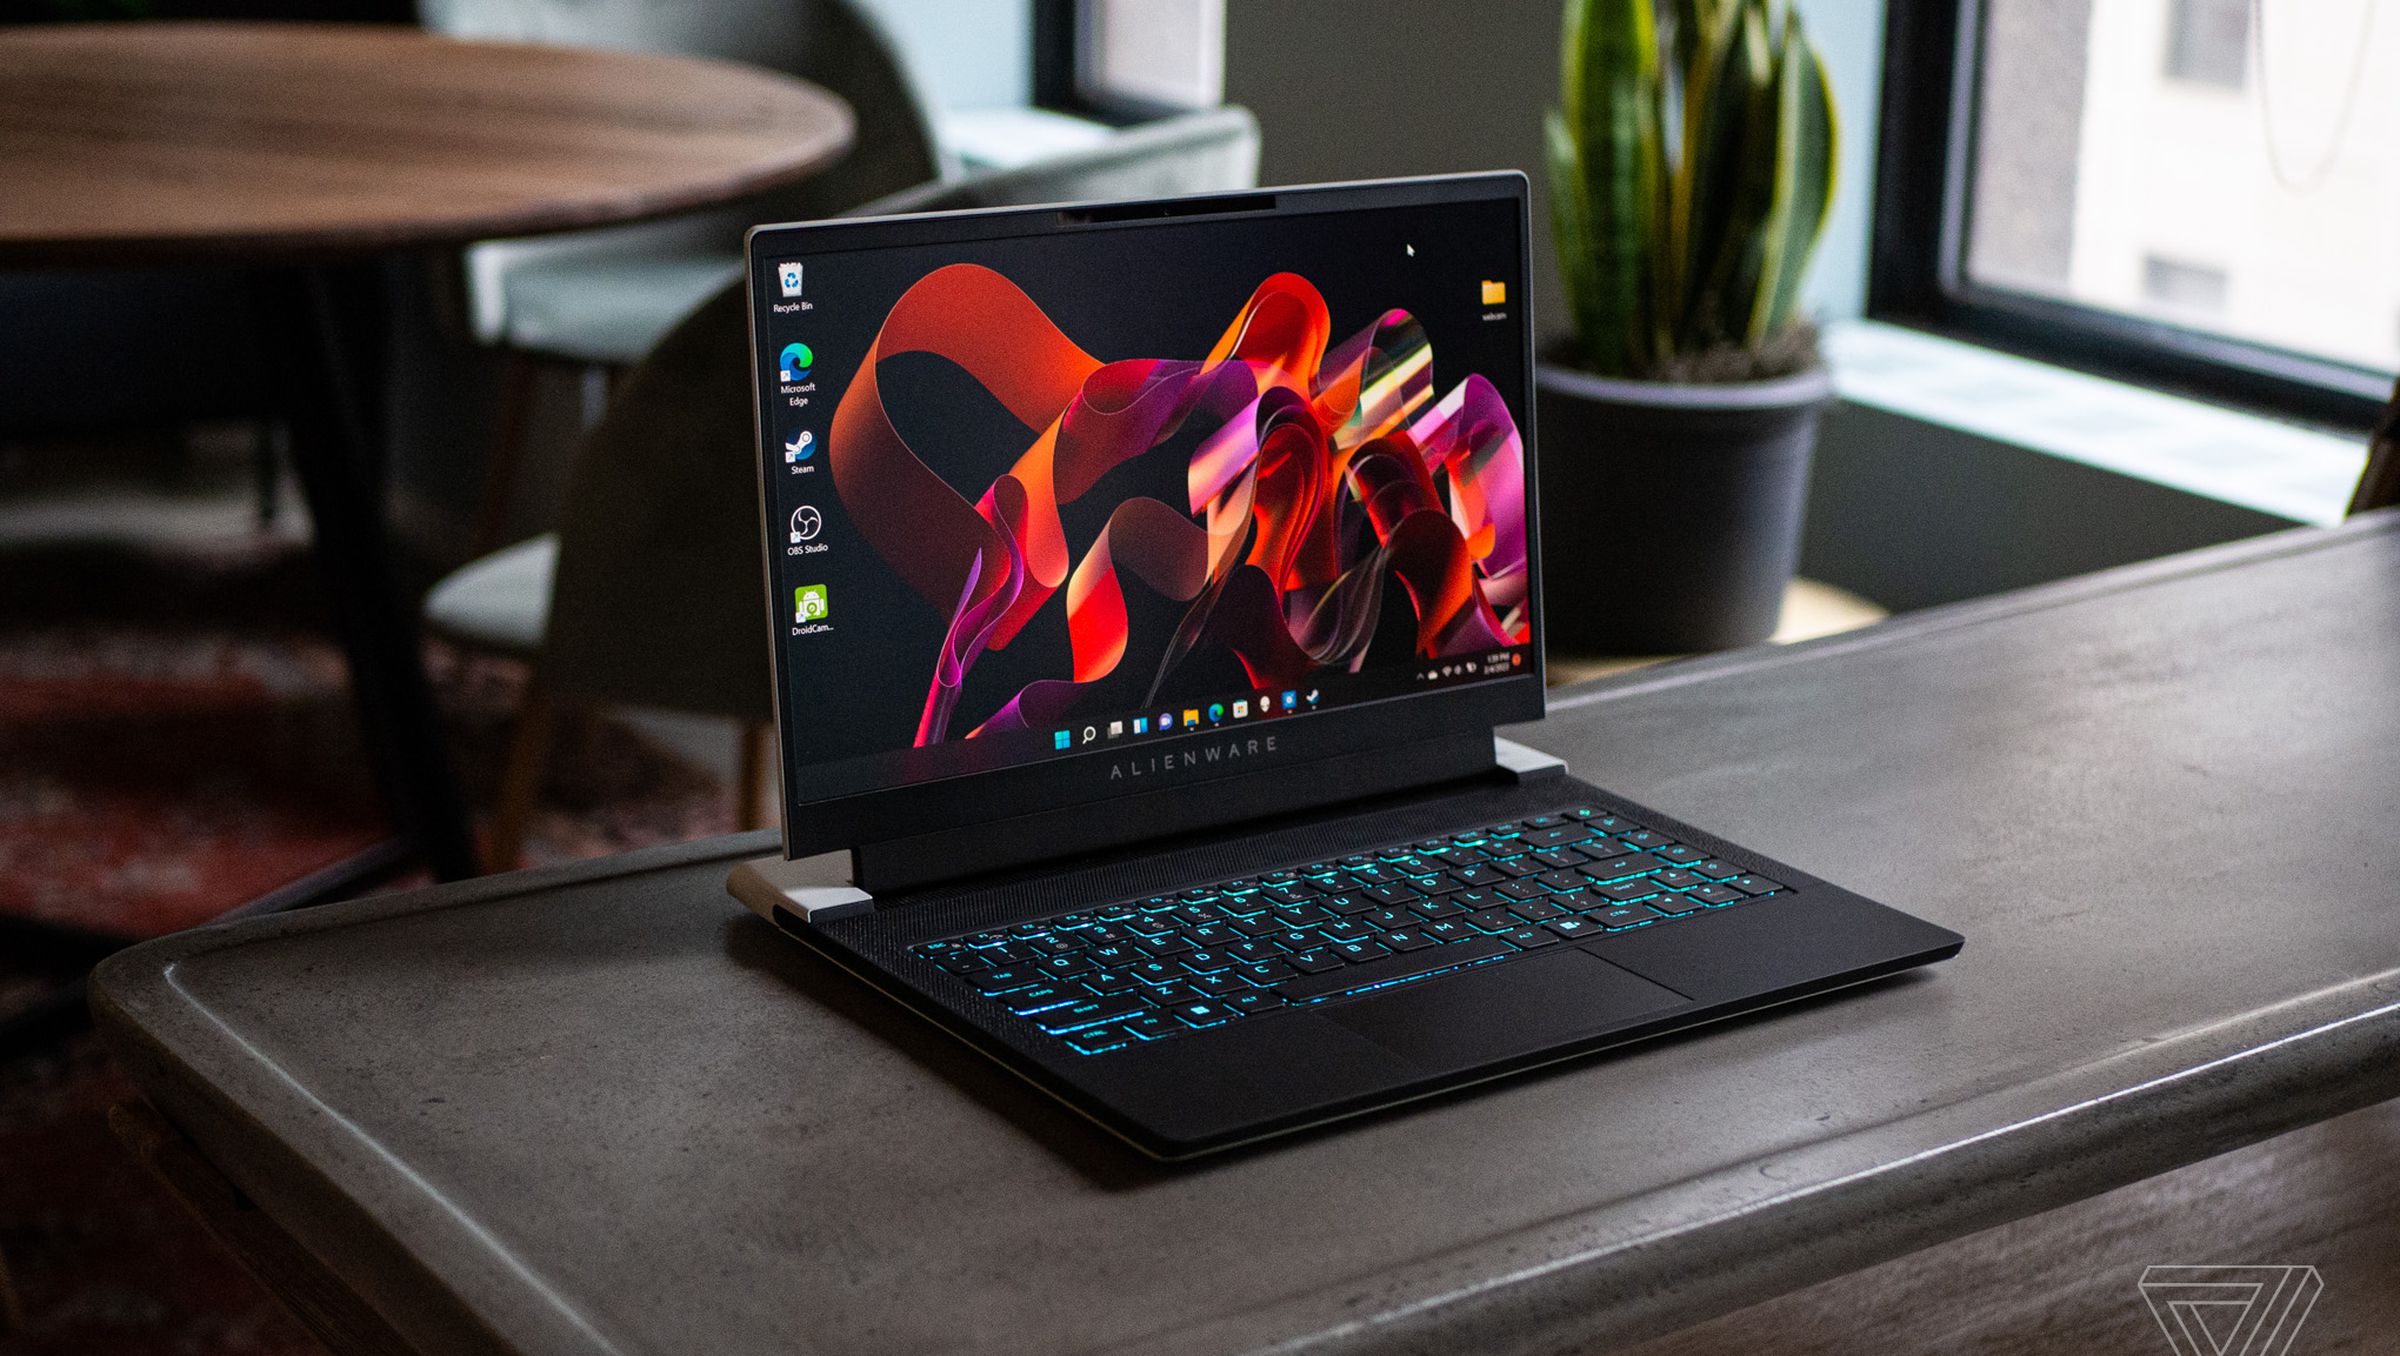 Alienware X14 review: smaller size, smaller performance - The Verge